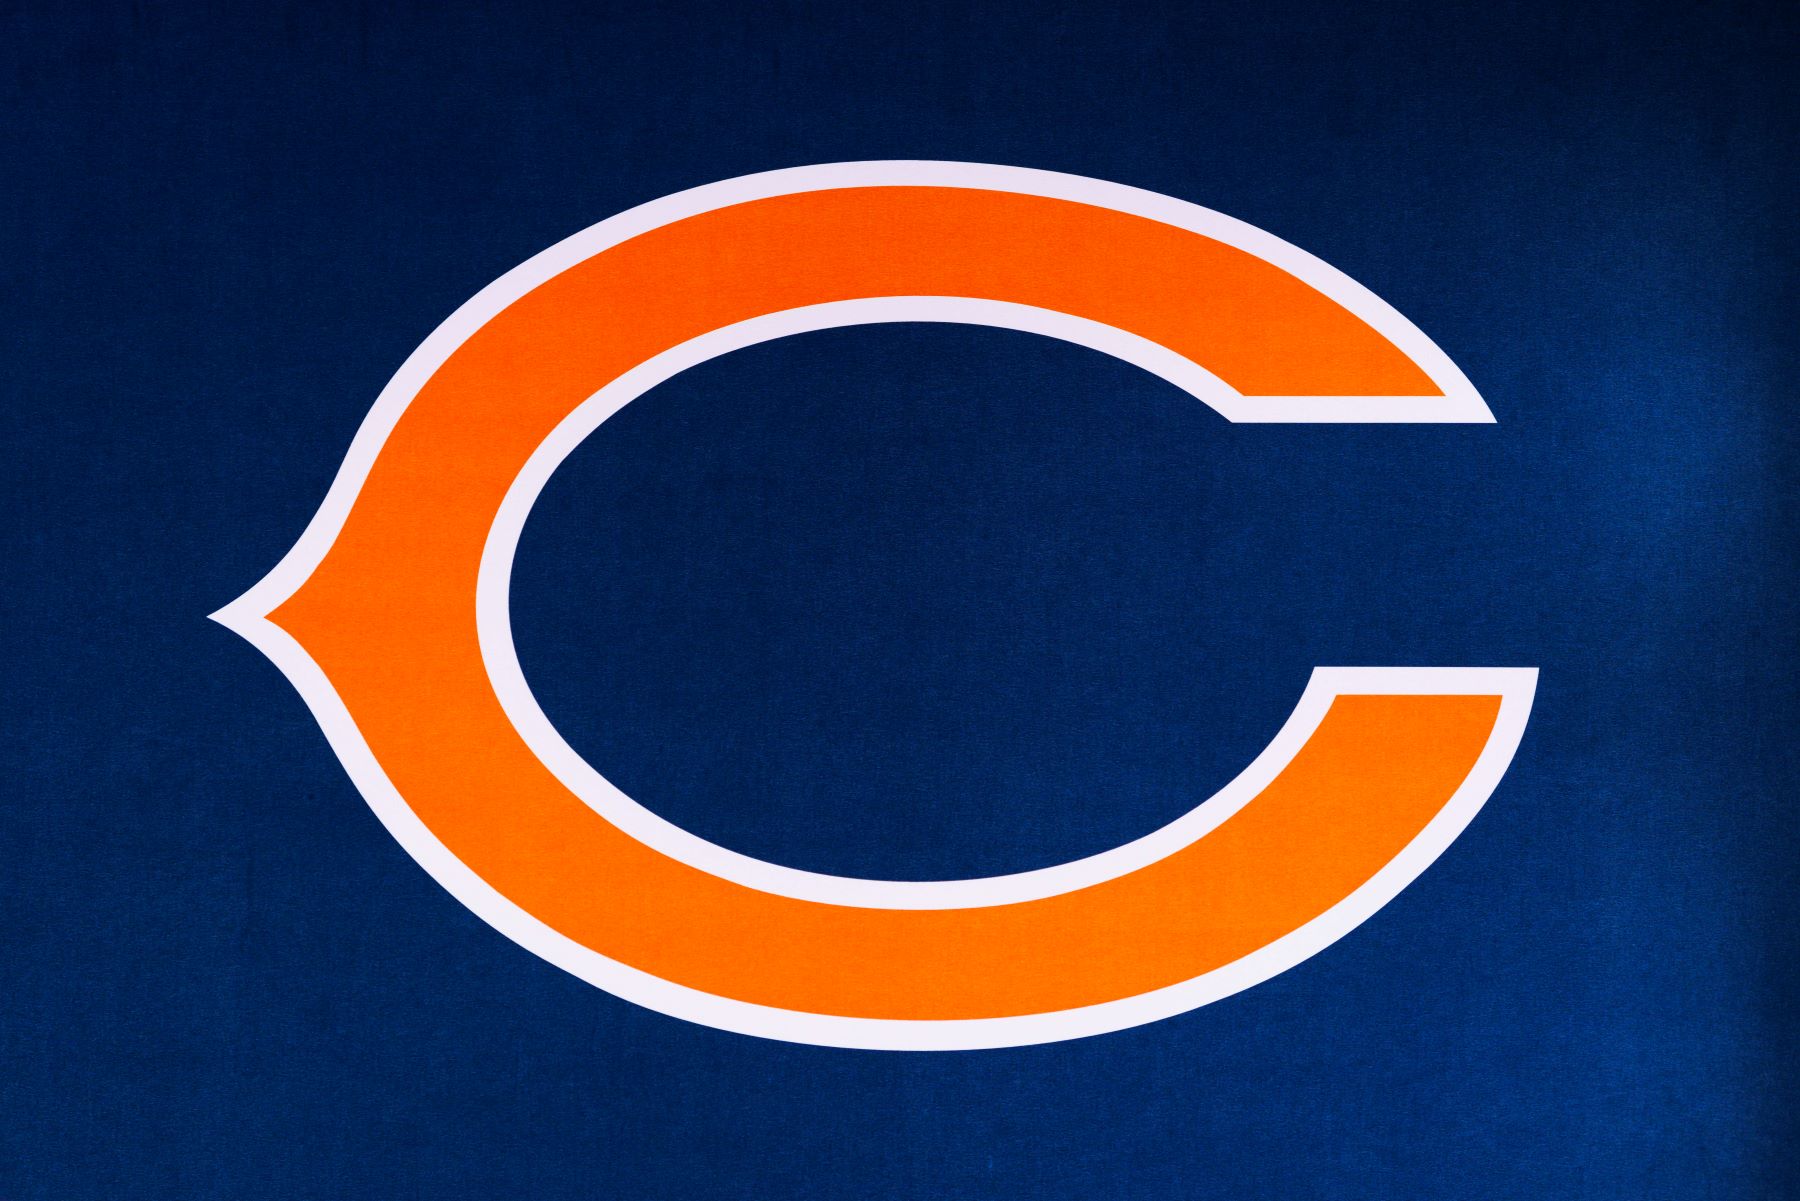 Chicago Bears logo seen at the Los Angeles Convention Center during the Super Bowl Experience